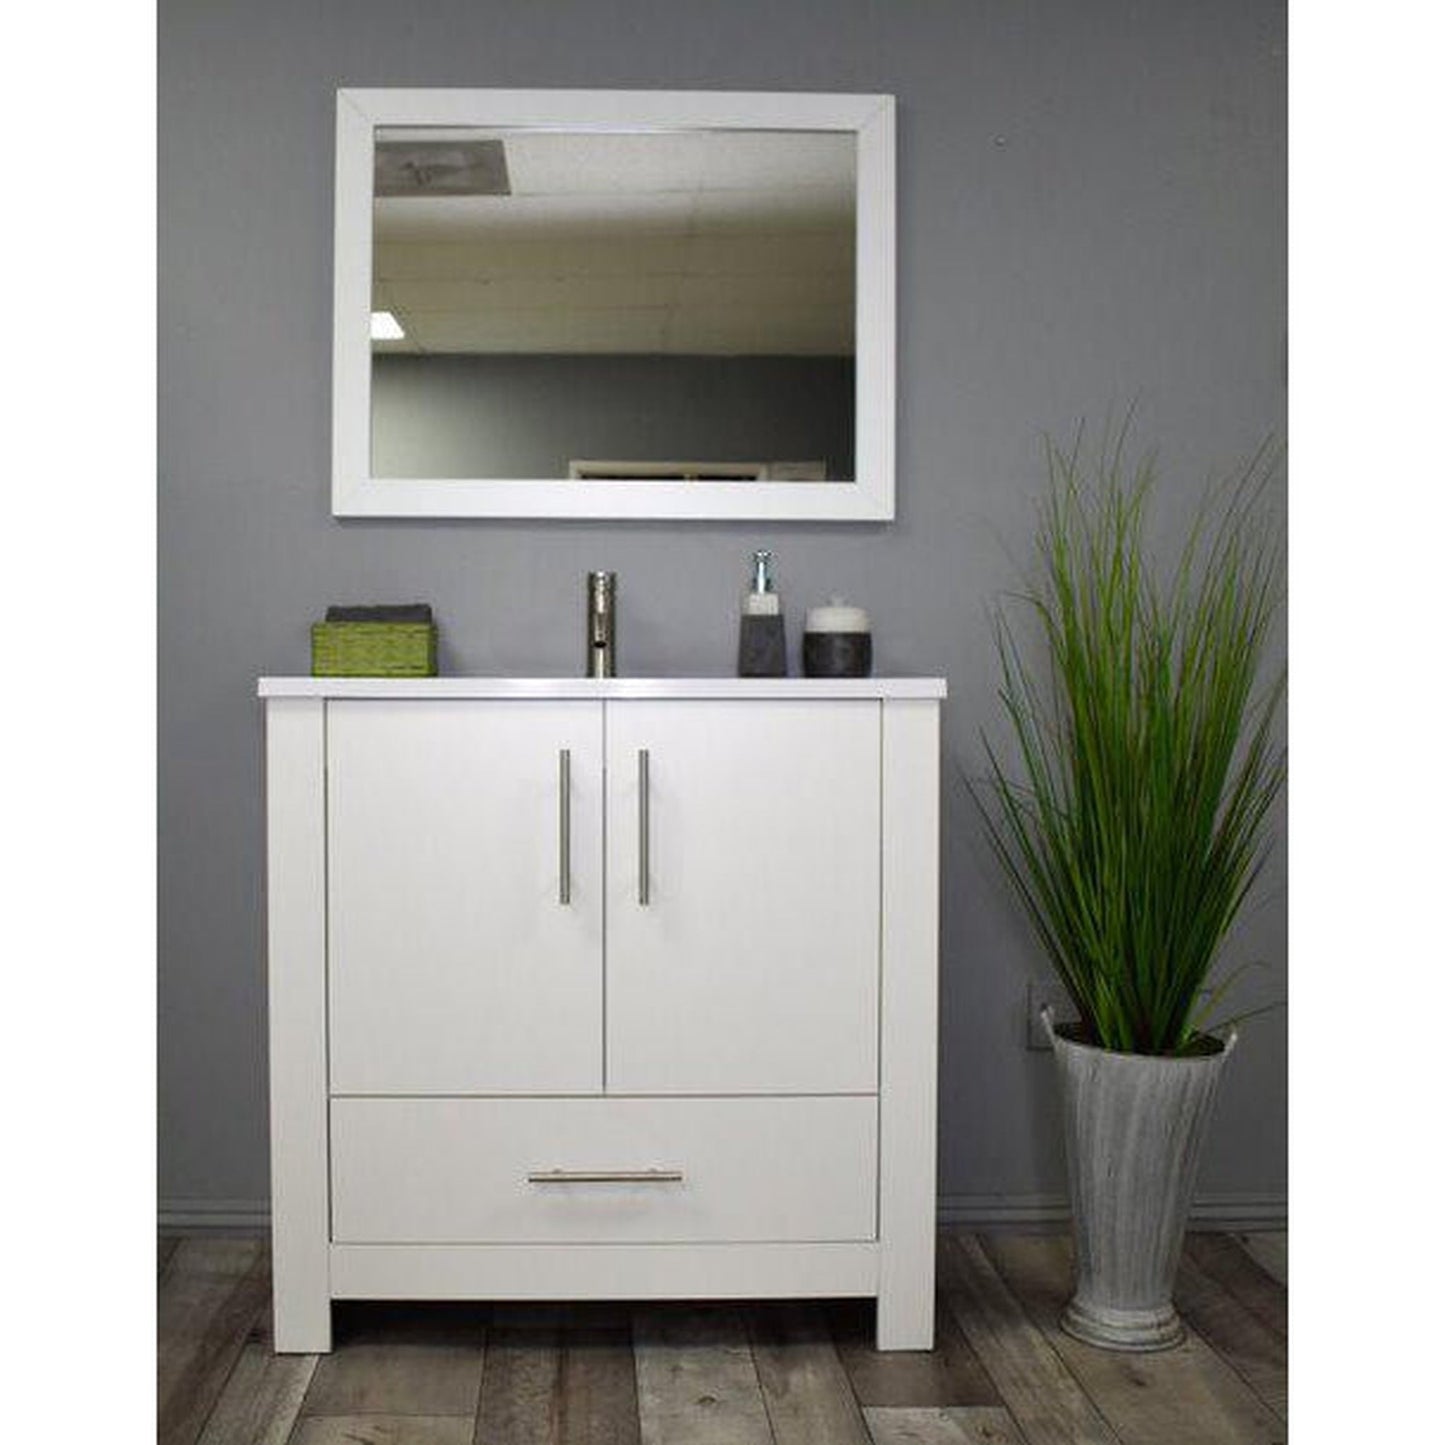 Volpa USA Boston 36" x 20" White Modern Freestanding Bathroom Vanity With Acrylic Top, Integrated Acrylic Sink And Brushed Nickel Handles